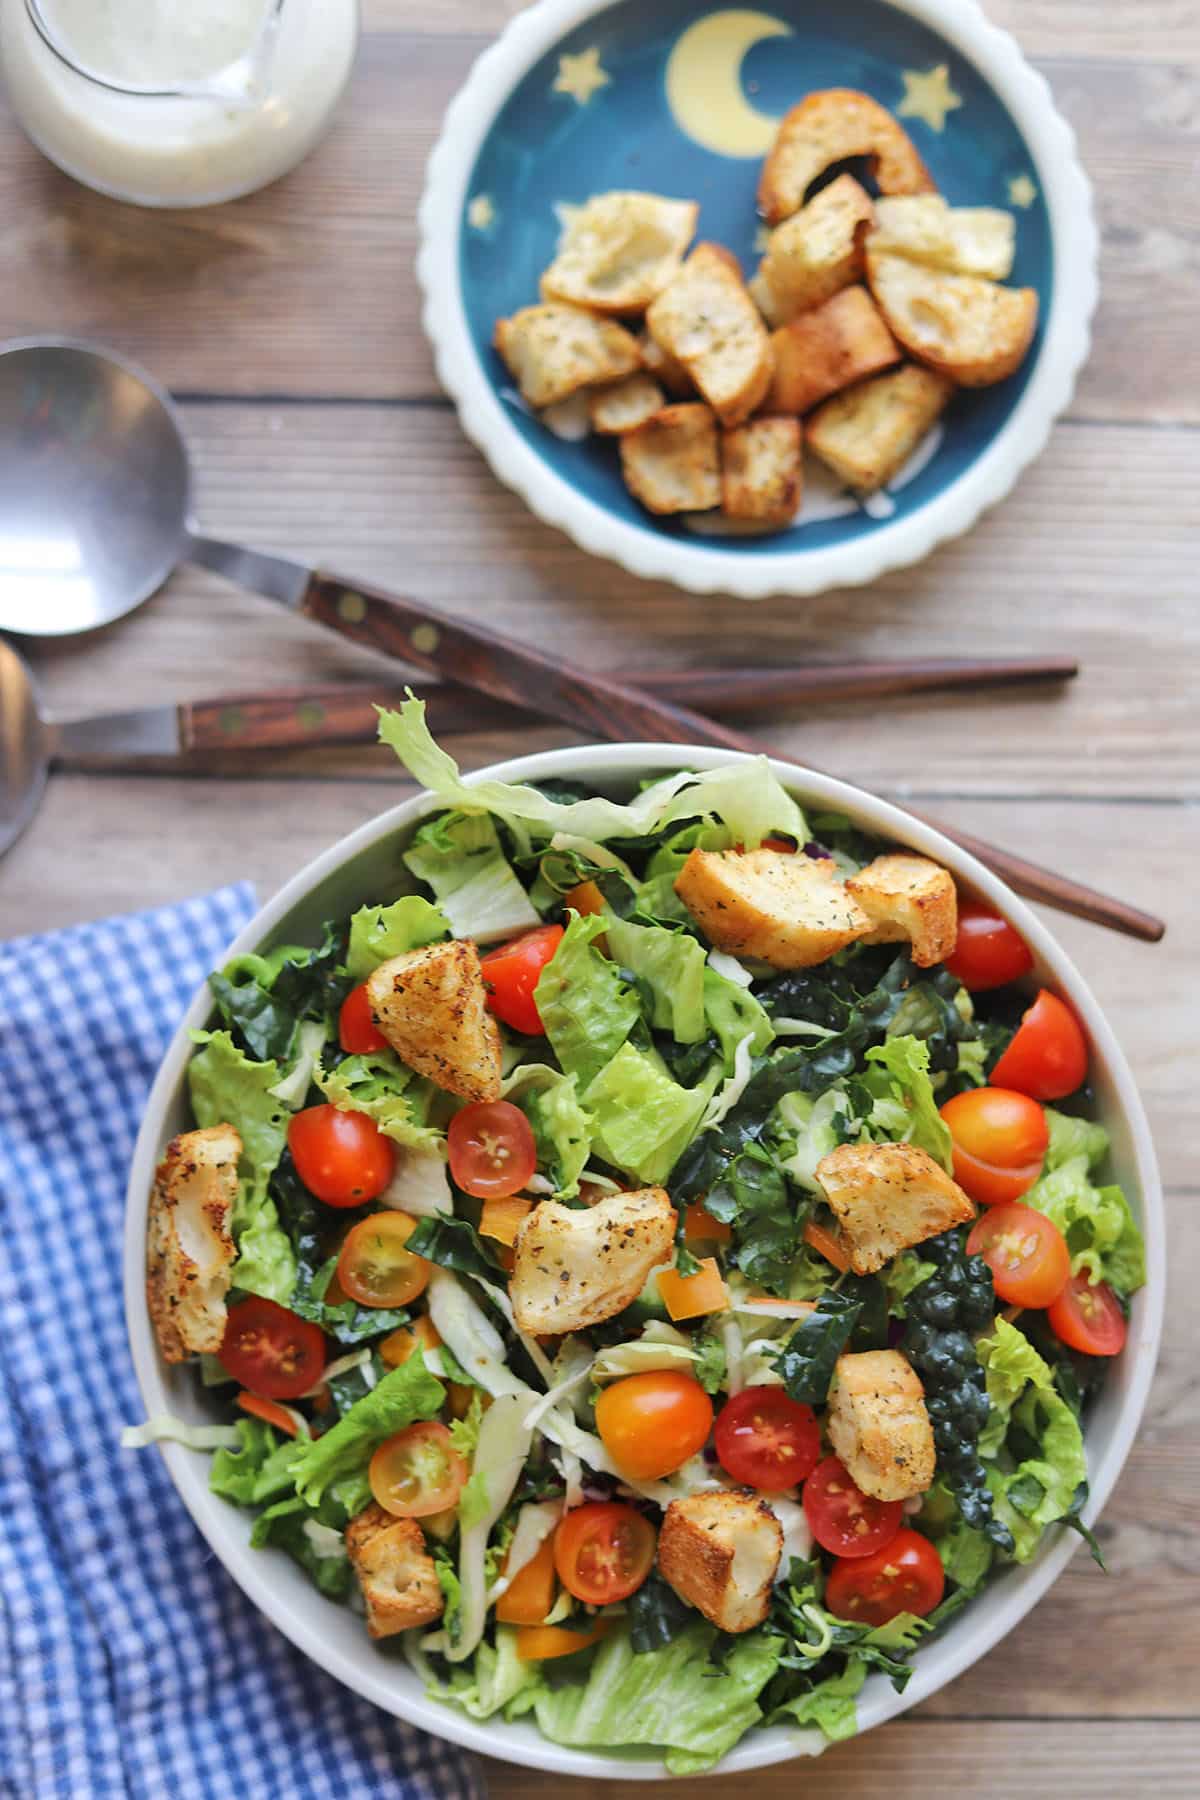 Salad with croutons in large bowl by serving utensils.